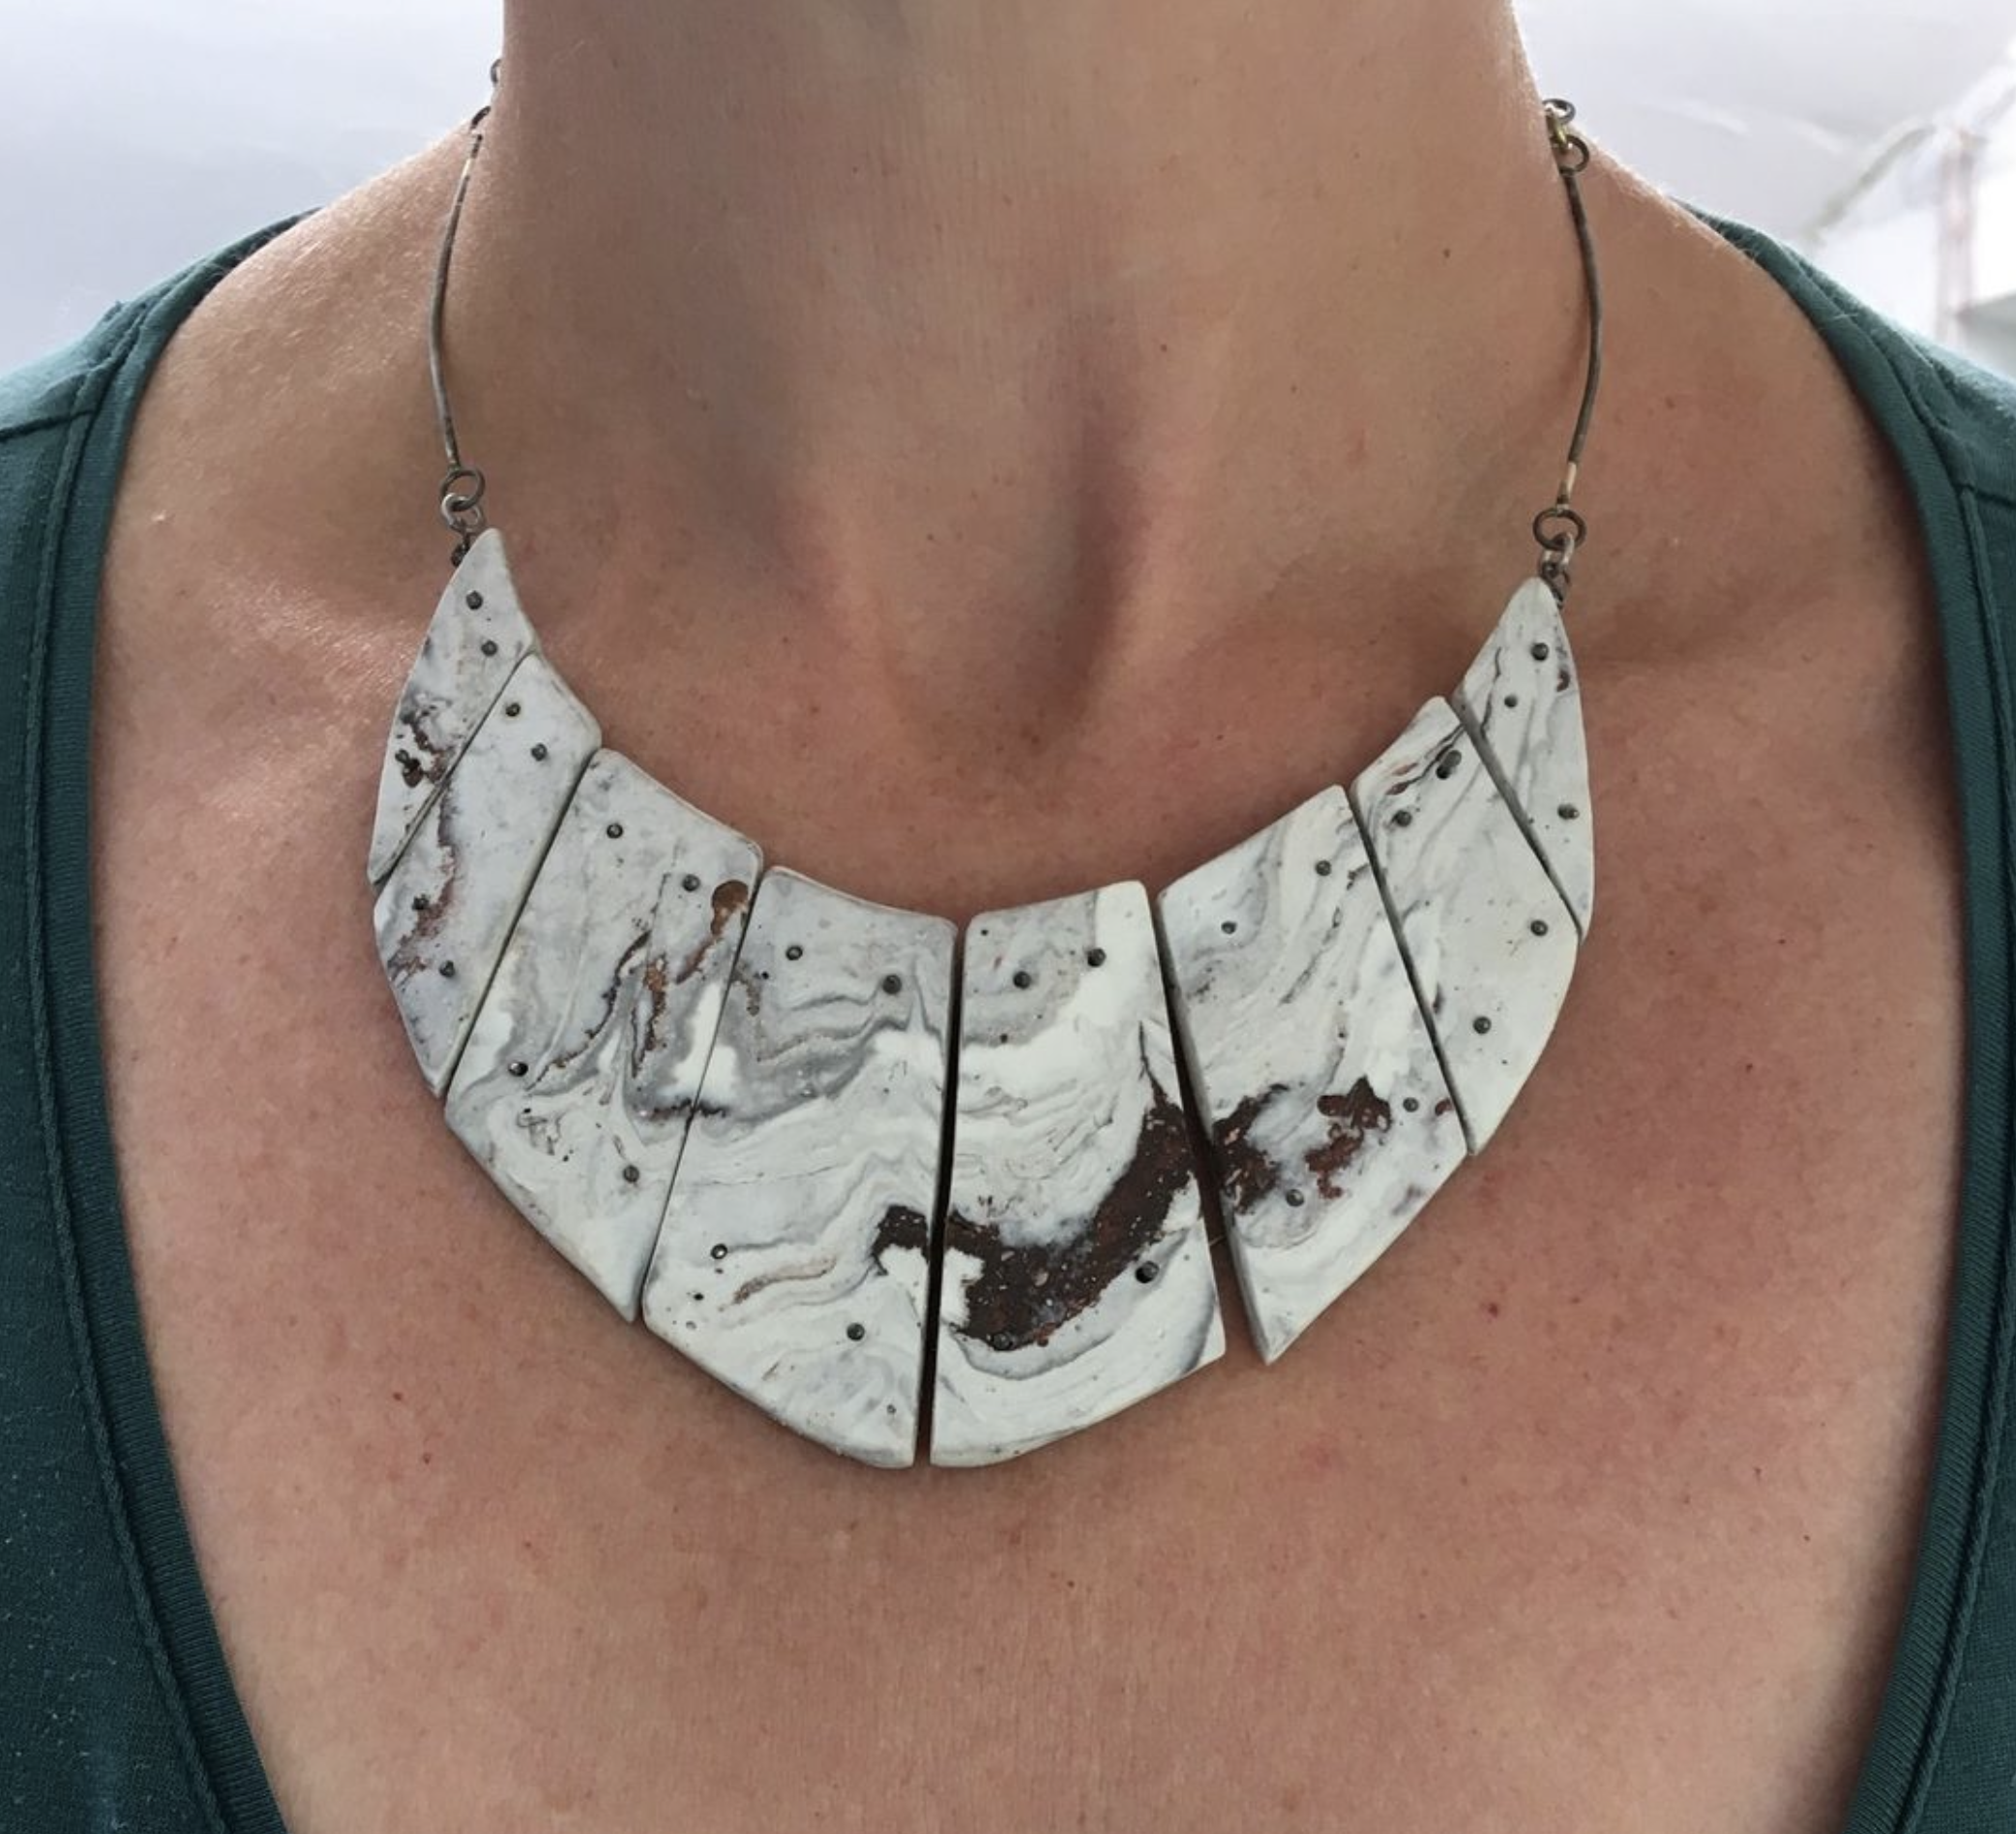 Necklace inspired by china clay in Cornwall